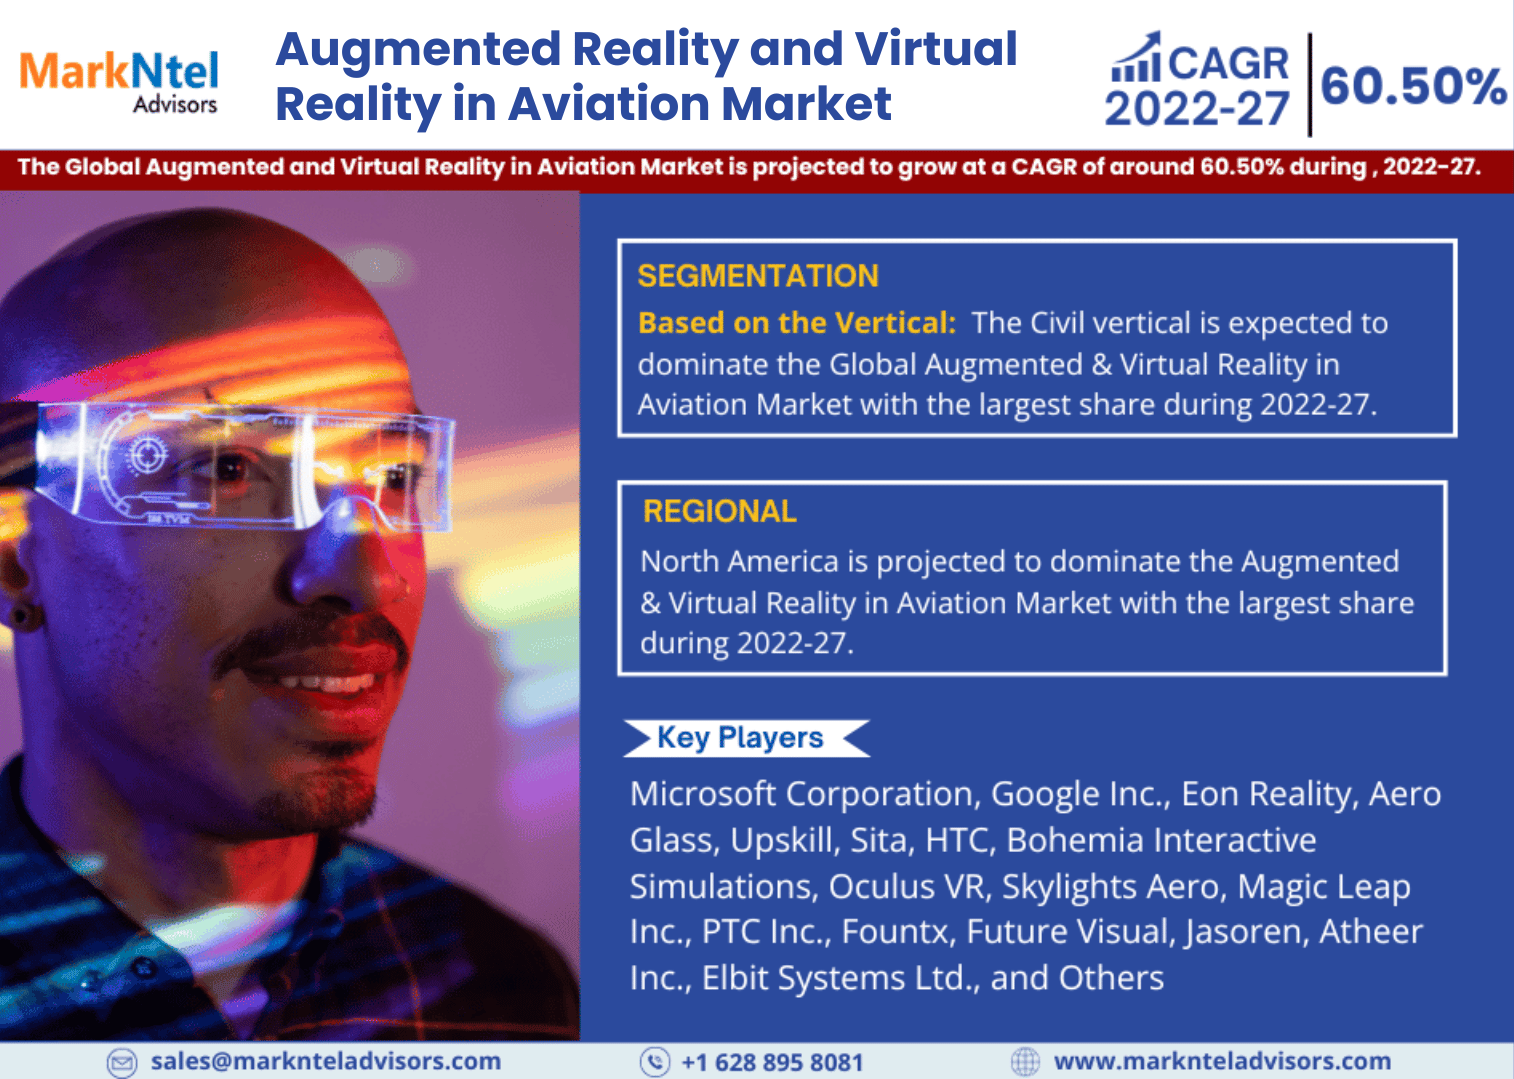 Global Augmented Reality and Virtual Reality in Aviation Market